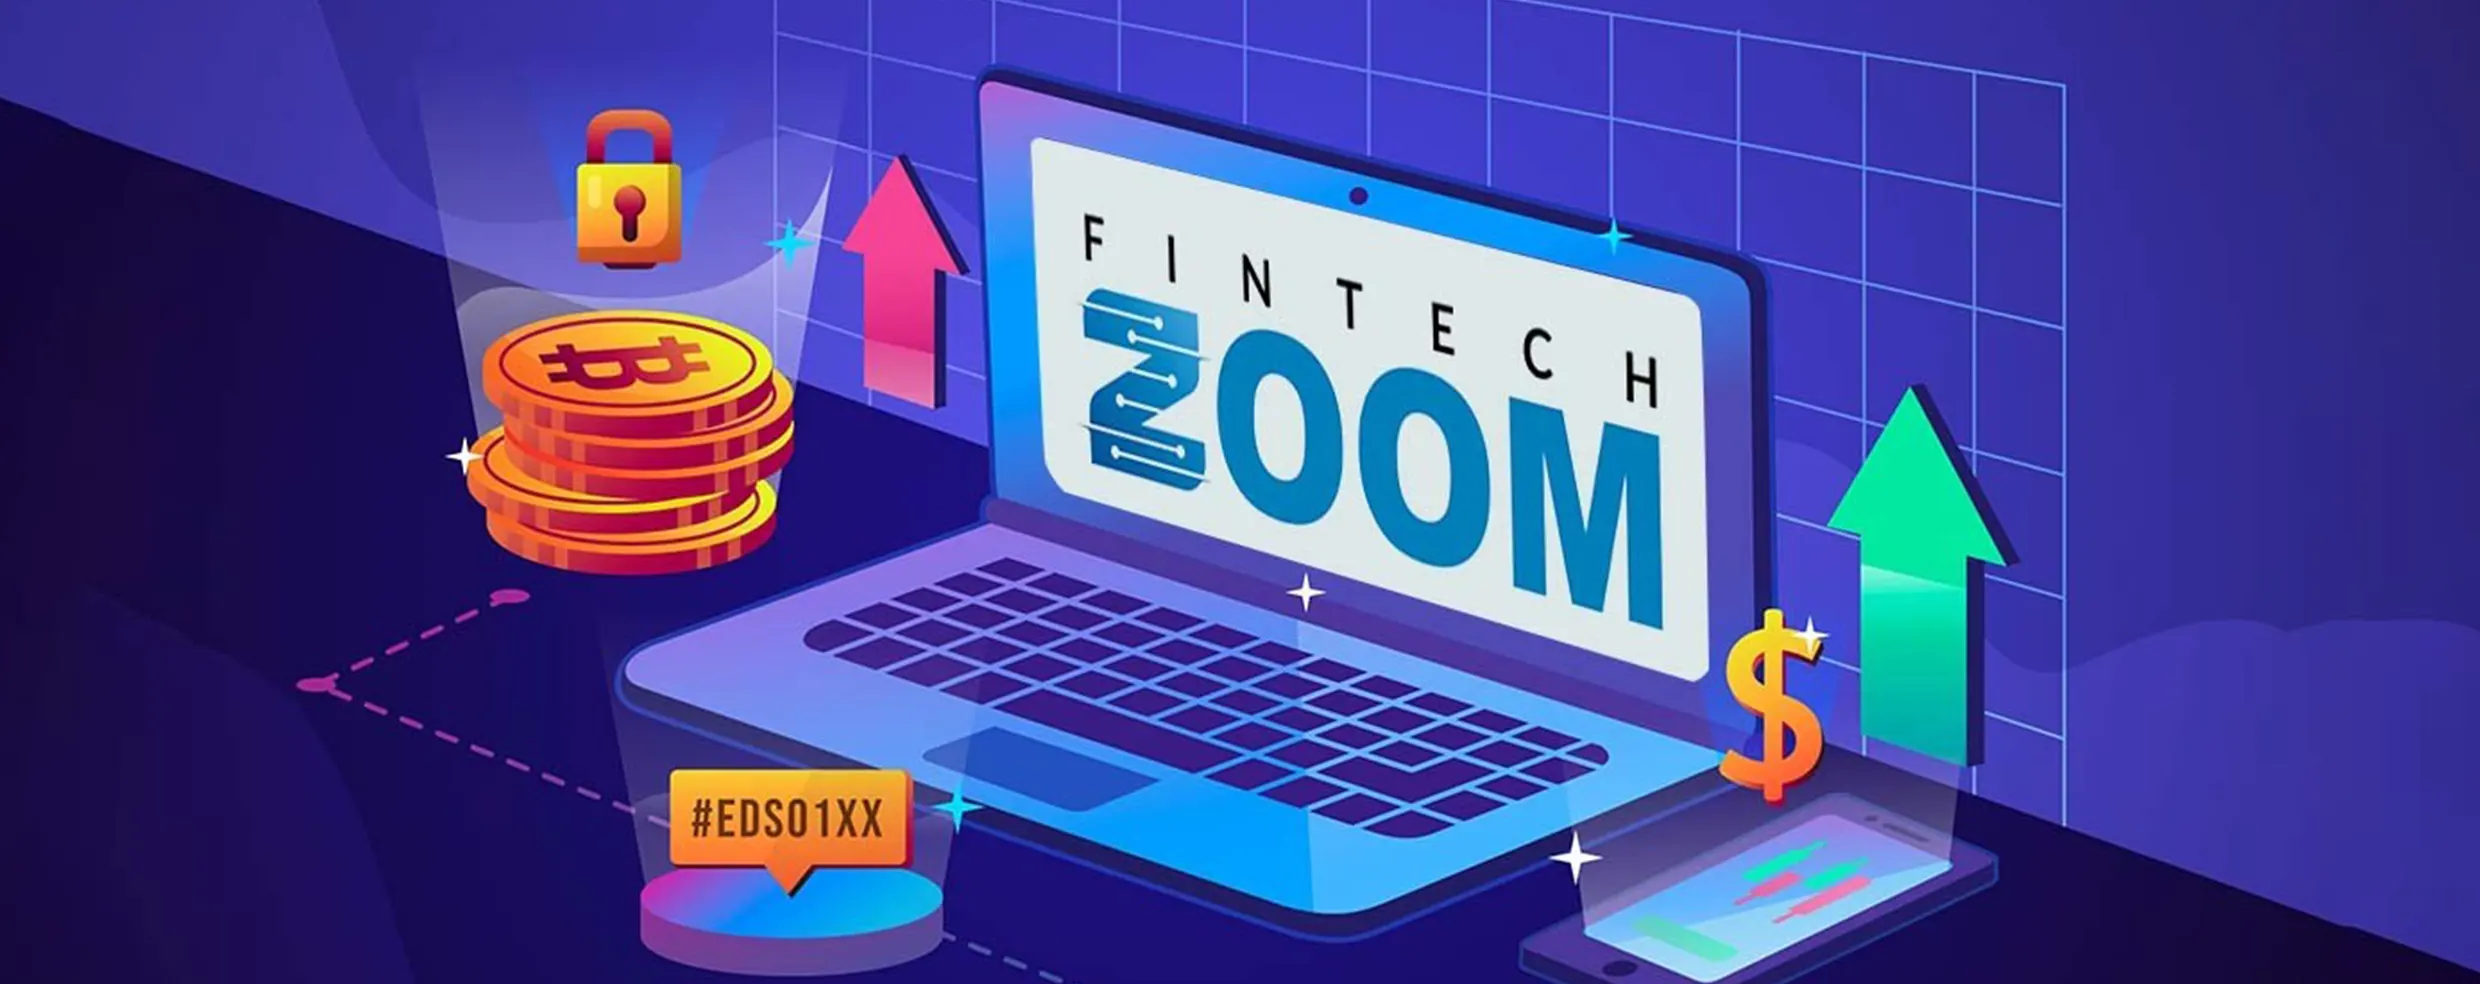 What is FintechZoom